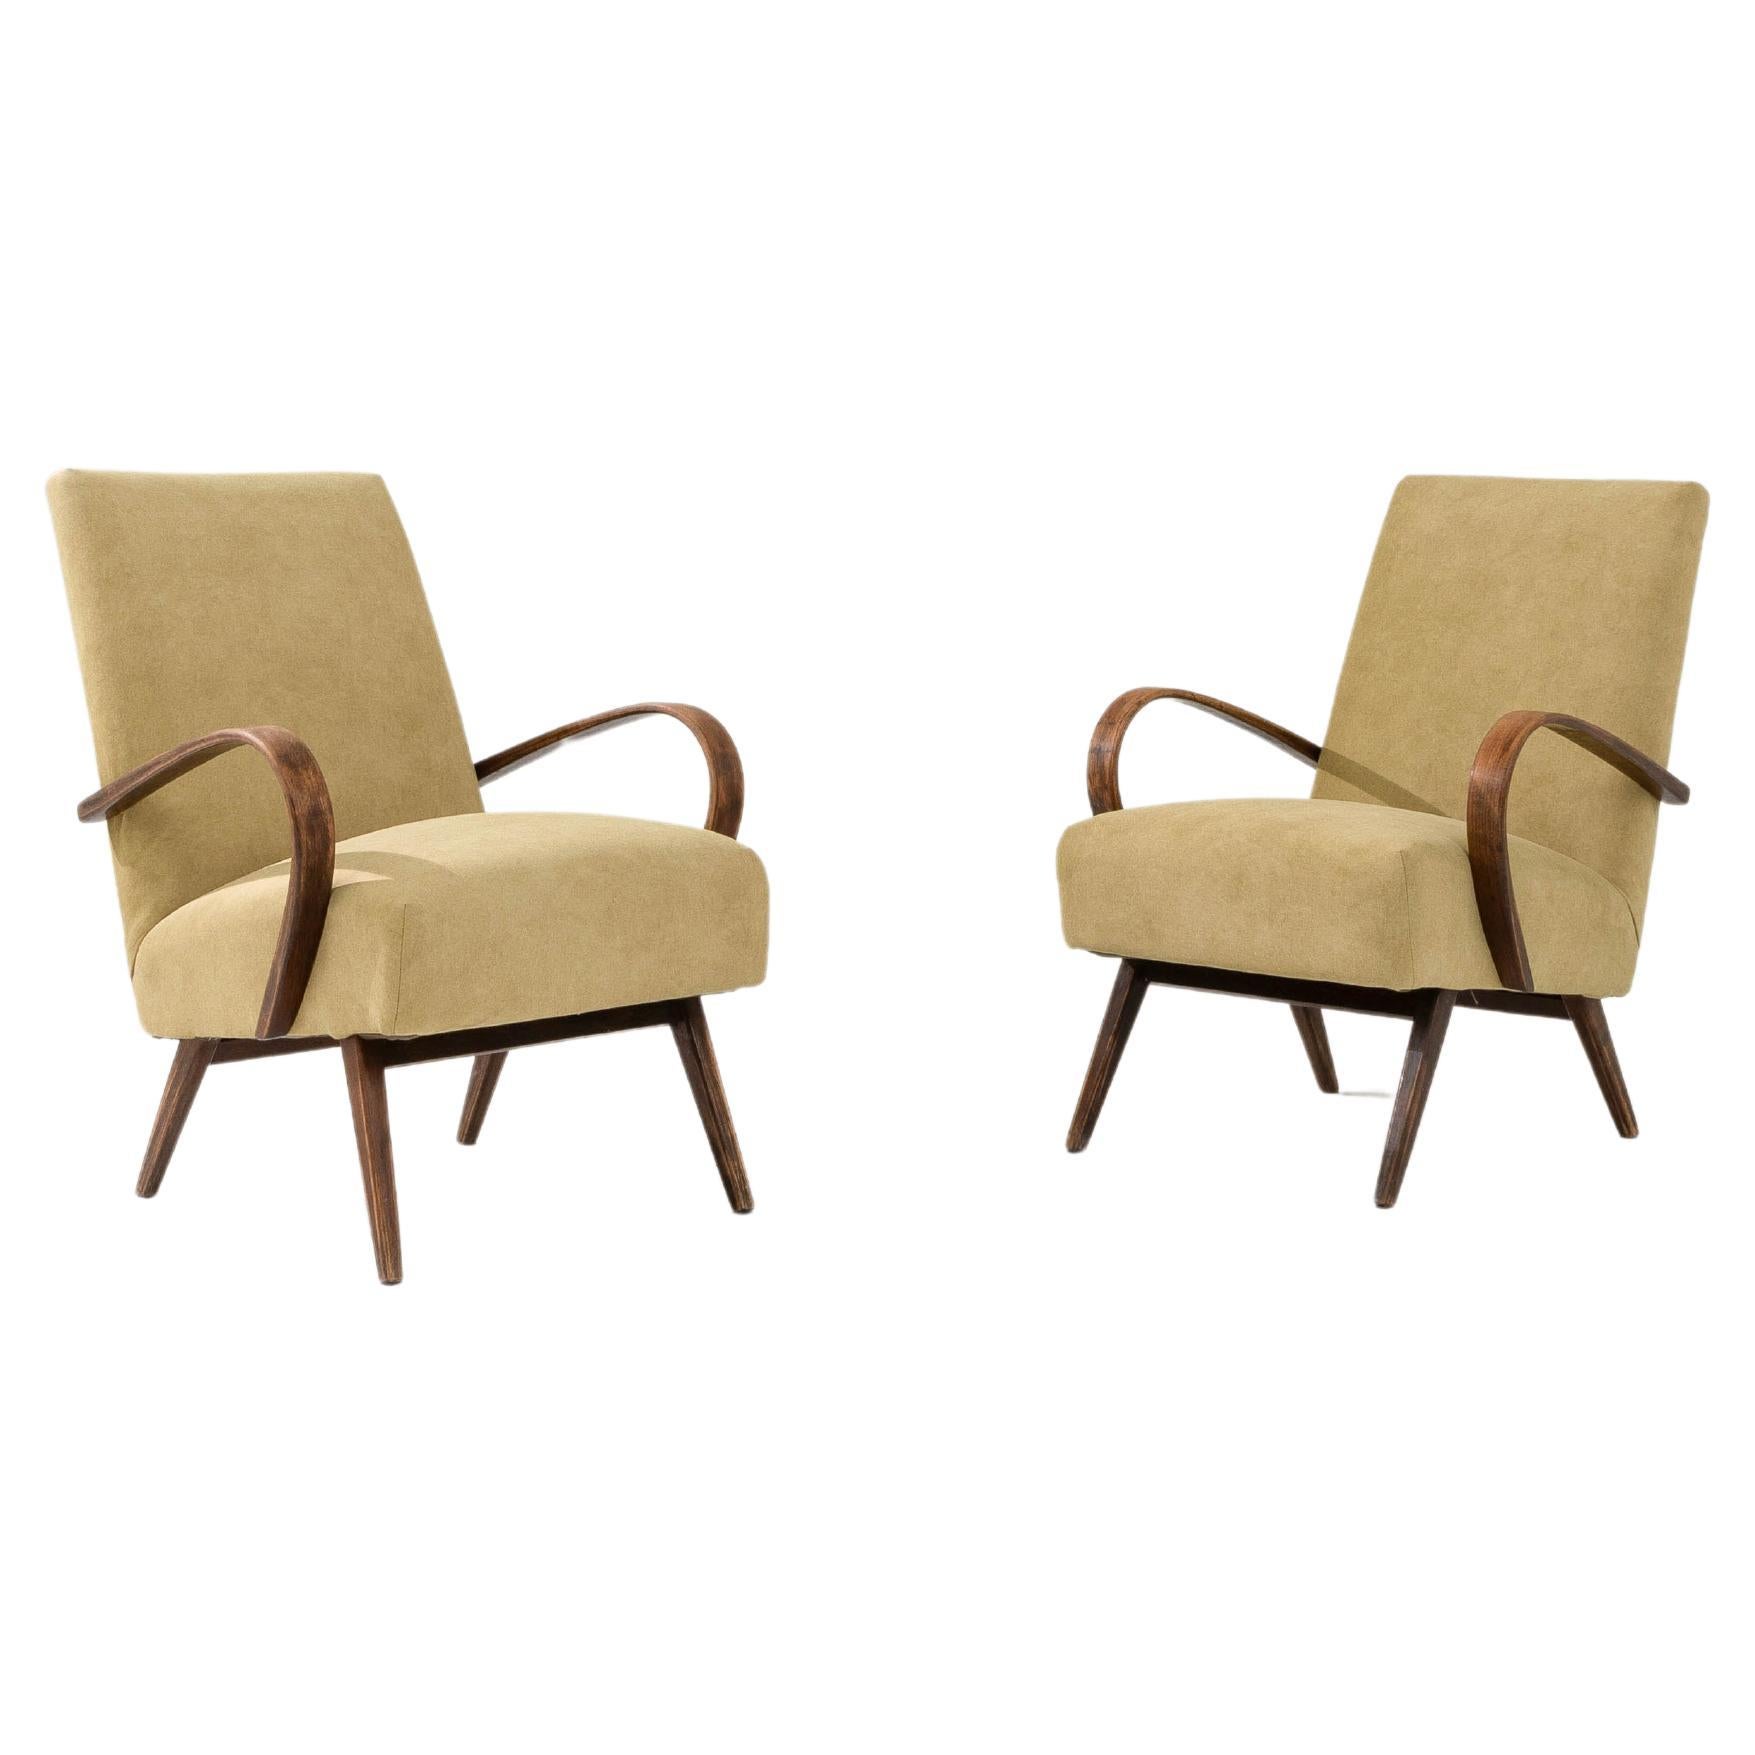 1950s Czech Upholstered Armchairs, a Pair For Sale